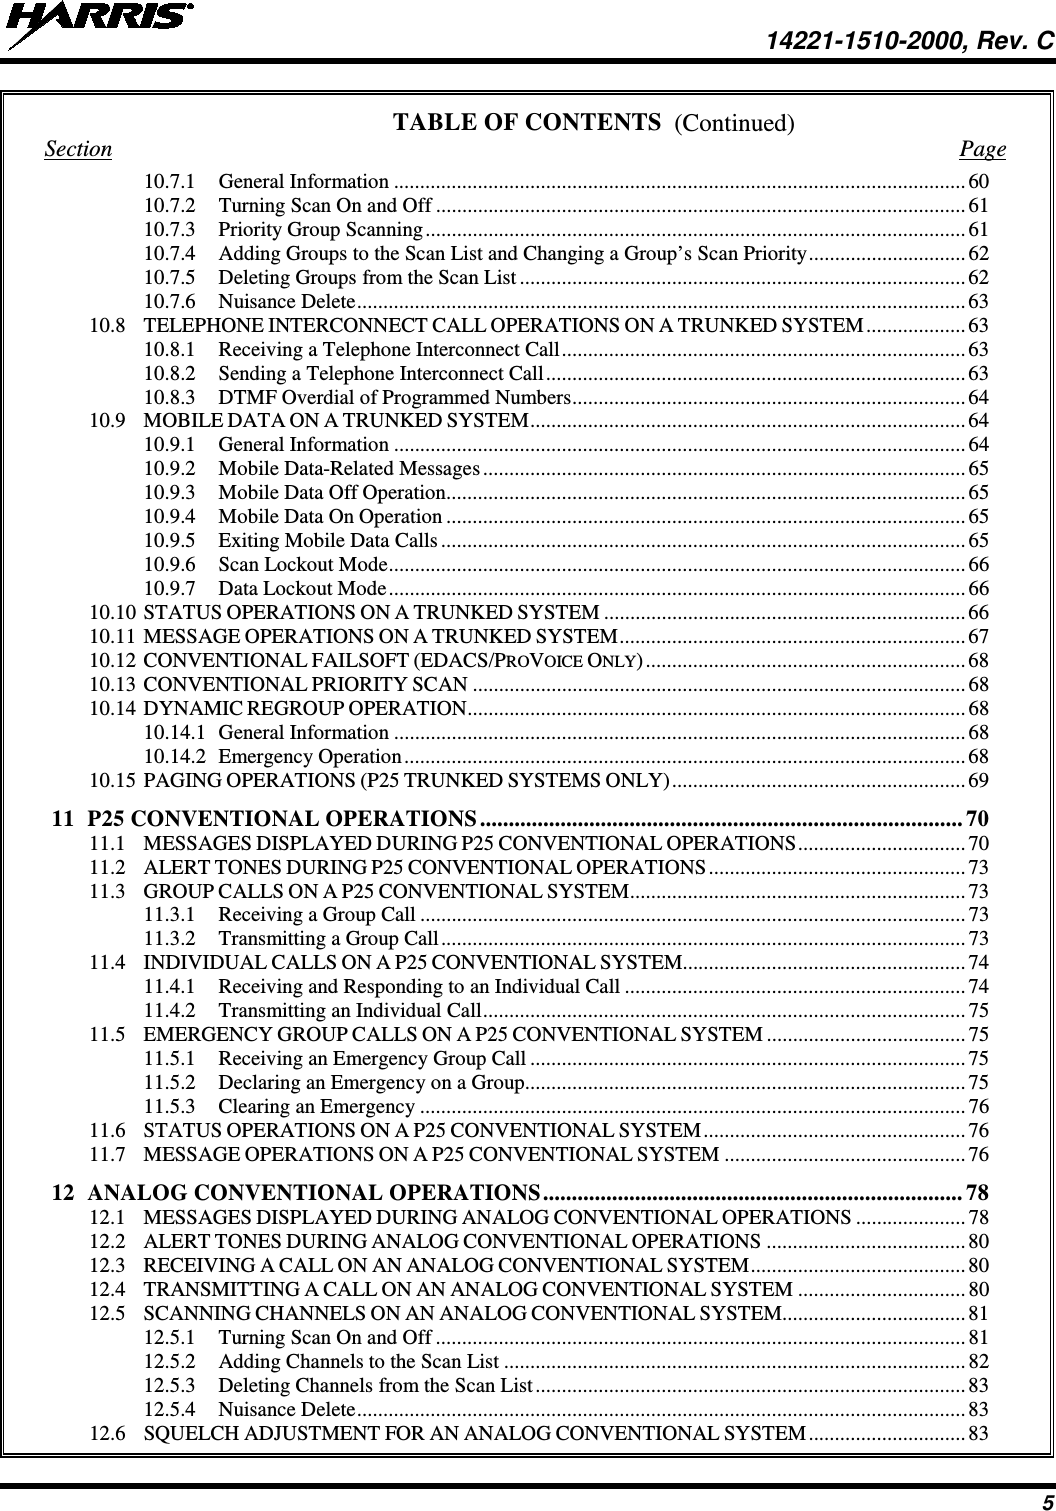  14221-1510-2000, Rev. C 5 (Continued) TABLE OF CONTENTS Section  Page 10.7.1 General Information ............................................................................................................. 60 10.7.2 Turning Scan On and Off ..................................................................................................... 61 10.7.3 Priority Group Scanning ....................................................................................................... 61 10.7.4 Adding Groups to the Scan List and Changing a Group’s Scan Priority .............................. 62 10.7.5 Deleting Groups from the Scan List ..................................................................................... 62 10.7.6 Nuisance Delete .................................................................................................................... 63 10.8 TELEPHONE INTERCONNECT CALL OPERATIONS ON A TRUNKED SYSTEM ................... 63 10.8.1 Receiving a Telephone Interconnect Call ............................................................................. 63 10.8.2 Sending a Telephone Interconnect Call ................................................................................ 63 10.8.3 DTMF Overdial of Programmed Numbers ........................................................................... 64 10.9 MOBILE DATA ON A TRUNKED SYSTEM ................................................................................... 64 10.9.1 General Information ............................................................................................................. 64 10.9.2 Mobile Data-Related Messages ............................................................................................ 65 10.9.3 Mobile Data Off Operation ................................................................................................... 65 10.9.4 Mobile Data On Operation ................................................................................................... 65 10.9.5 Exiting Mobile Data Calls .................................................................................................... 65 10.9.6 Scan Lockout Mode .............................................................................................................. 66 10.9.7 Data Lockout Mode .............................................................................................................. 66 10.10 STATUS OPERATIONS ON A TRUNKED SYSTEM ..................................................................... 66 10.11 MESSAGE OPERATIONS ON A TRUNKED SYSTEM .................................................................. 67 10.12 CONVENTIONAL FAILSOFT (EDACS/PROVOICE ONLY) ............................................................. 68 10.13 CONVENTIONAL PRIORITY SCAN .............................................................................................. 68 10.14 DYNAMIC REGROUP OPERATION ............................................................................................... 68 10.14.1 General Information ............................................................................................................. 68 10.14.2 Emergency Operation ........................................................................................................... 68 10.15 PAGING OPERATIONS (P25 TRUNKED SYSTEMS ONLY) ........................................................ 69 11 P25 CONVENTIONAL OPERATIONS .................................................................................... 70 11.1 MESSAGES DISPLAYED DURING P25 CONVENTIONAL OPERATIONS ................................ 70 11.2 ALERT TONES DURING P25 CONVENTIONAL OPERATIONS ................................................. 73 11.3 GROUP CALLS ON A P25 CONVENTIONAL SYSTEM ................................................................ 73 11.3.1 Receiving a Group Call ........................................................................................................ 73 11.3.2 Transmitting a Group Call .................................................................................................... 73 11.4 INDIVIDUAL CALLS ON A P25 CONVENTIONAL SYSTEM...................................................... 74 11.4.1 Receiving and Responding to an Individual Call ................................................................. 74 11.4.2 Transmitting an Individual Call ............................................................................................ 75 11.5 EMERGENCY GROUP CALLS ON A P25 CONVENTIONAL SYSTEM ...................................... 75 11.5.1 Receiving an Emergency Group Call ................................................................................... 75 11.5.2 Declaring an Emergency on a Group .................................................................................... 75 11.5.3 Clearing an Emergency ........................................................................................................ 76 11.6 STATUS OPERATIONS ON A P25 CONVENTIONAL SYSTEM .................................................. 76 11.7 MESSAGE OPERATIONS ON A P25 CONVENTIONAL SYSTEM .............................................. 76 12 ANALOG CONVENTIONAL OPERATIONS ......................................................................... 78 12.1 MESSAGES DISPLAYED DURING ANALOG CONVENTIONAL OPERATIONS ..................... 78 12.2 ALERT TONES DURING ANALOG CONVENTIONAL OPERATIONS ...................................... 80 12.3 RECEIVING A CALL ON AN ANALOG CONVENTIONAL SYSTEM ......................................... 80 12.4 TRANSMITTING A CALL ON AN ANALOG CONVENTIONAL SYSTEM ................................ 80 12.5 SCANNING CHANNELS ON AN ANALOG CONVENTIONAL SYSTEM................................... 81 12.5.1 Turning Scan On and Off ..................................................................................................... 81 12.5.2 Adding Channels to the Scan List ........................................................................................ 82 12.5.3 Deleting Channels from the Scan List .................................................................................. 83 12.5.4 Nuisance Delete .................................................................................................................... 83 12.6 SQUELCH ADJUSTMENT FOR AN ANALOG CONVENTIONAL SYSTEM .............................. 83 